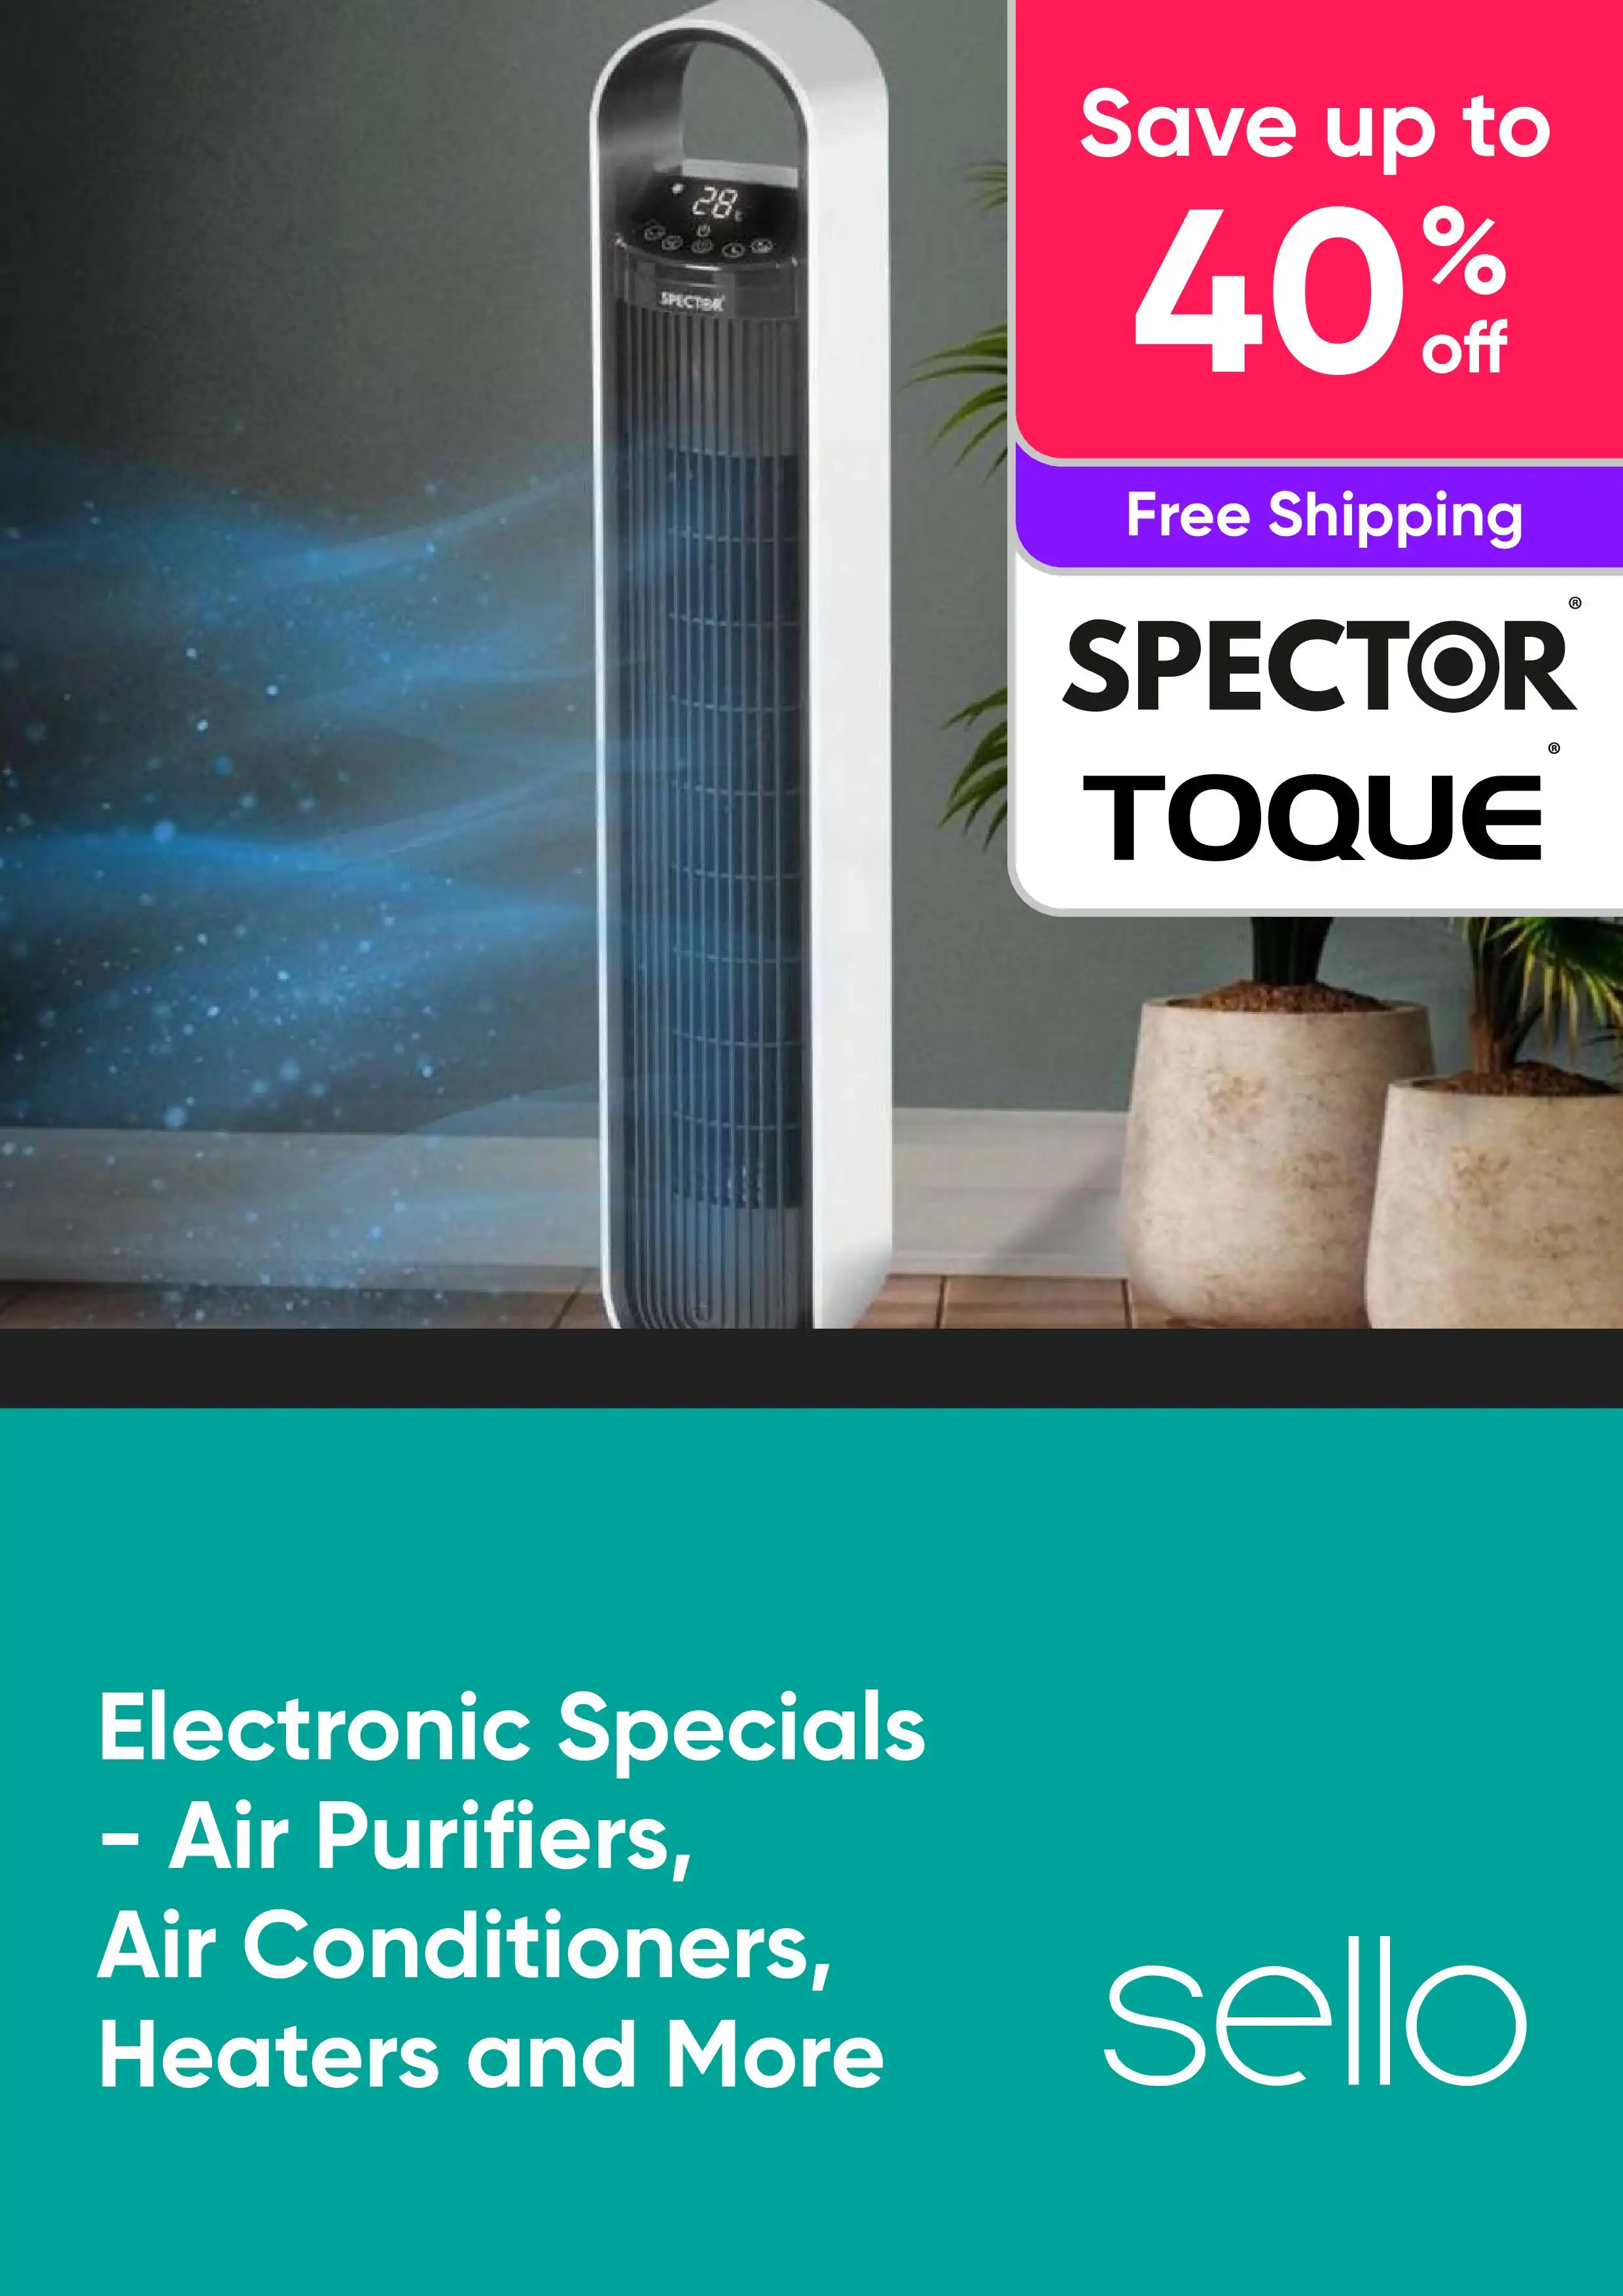 Electronic Specials - Air Purifiers, Portable Fans, Heaters and More - Spector, Toque - Up to 40% Off